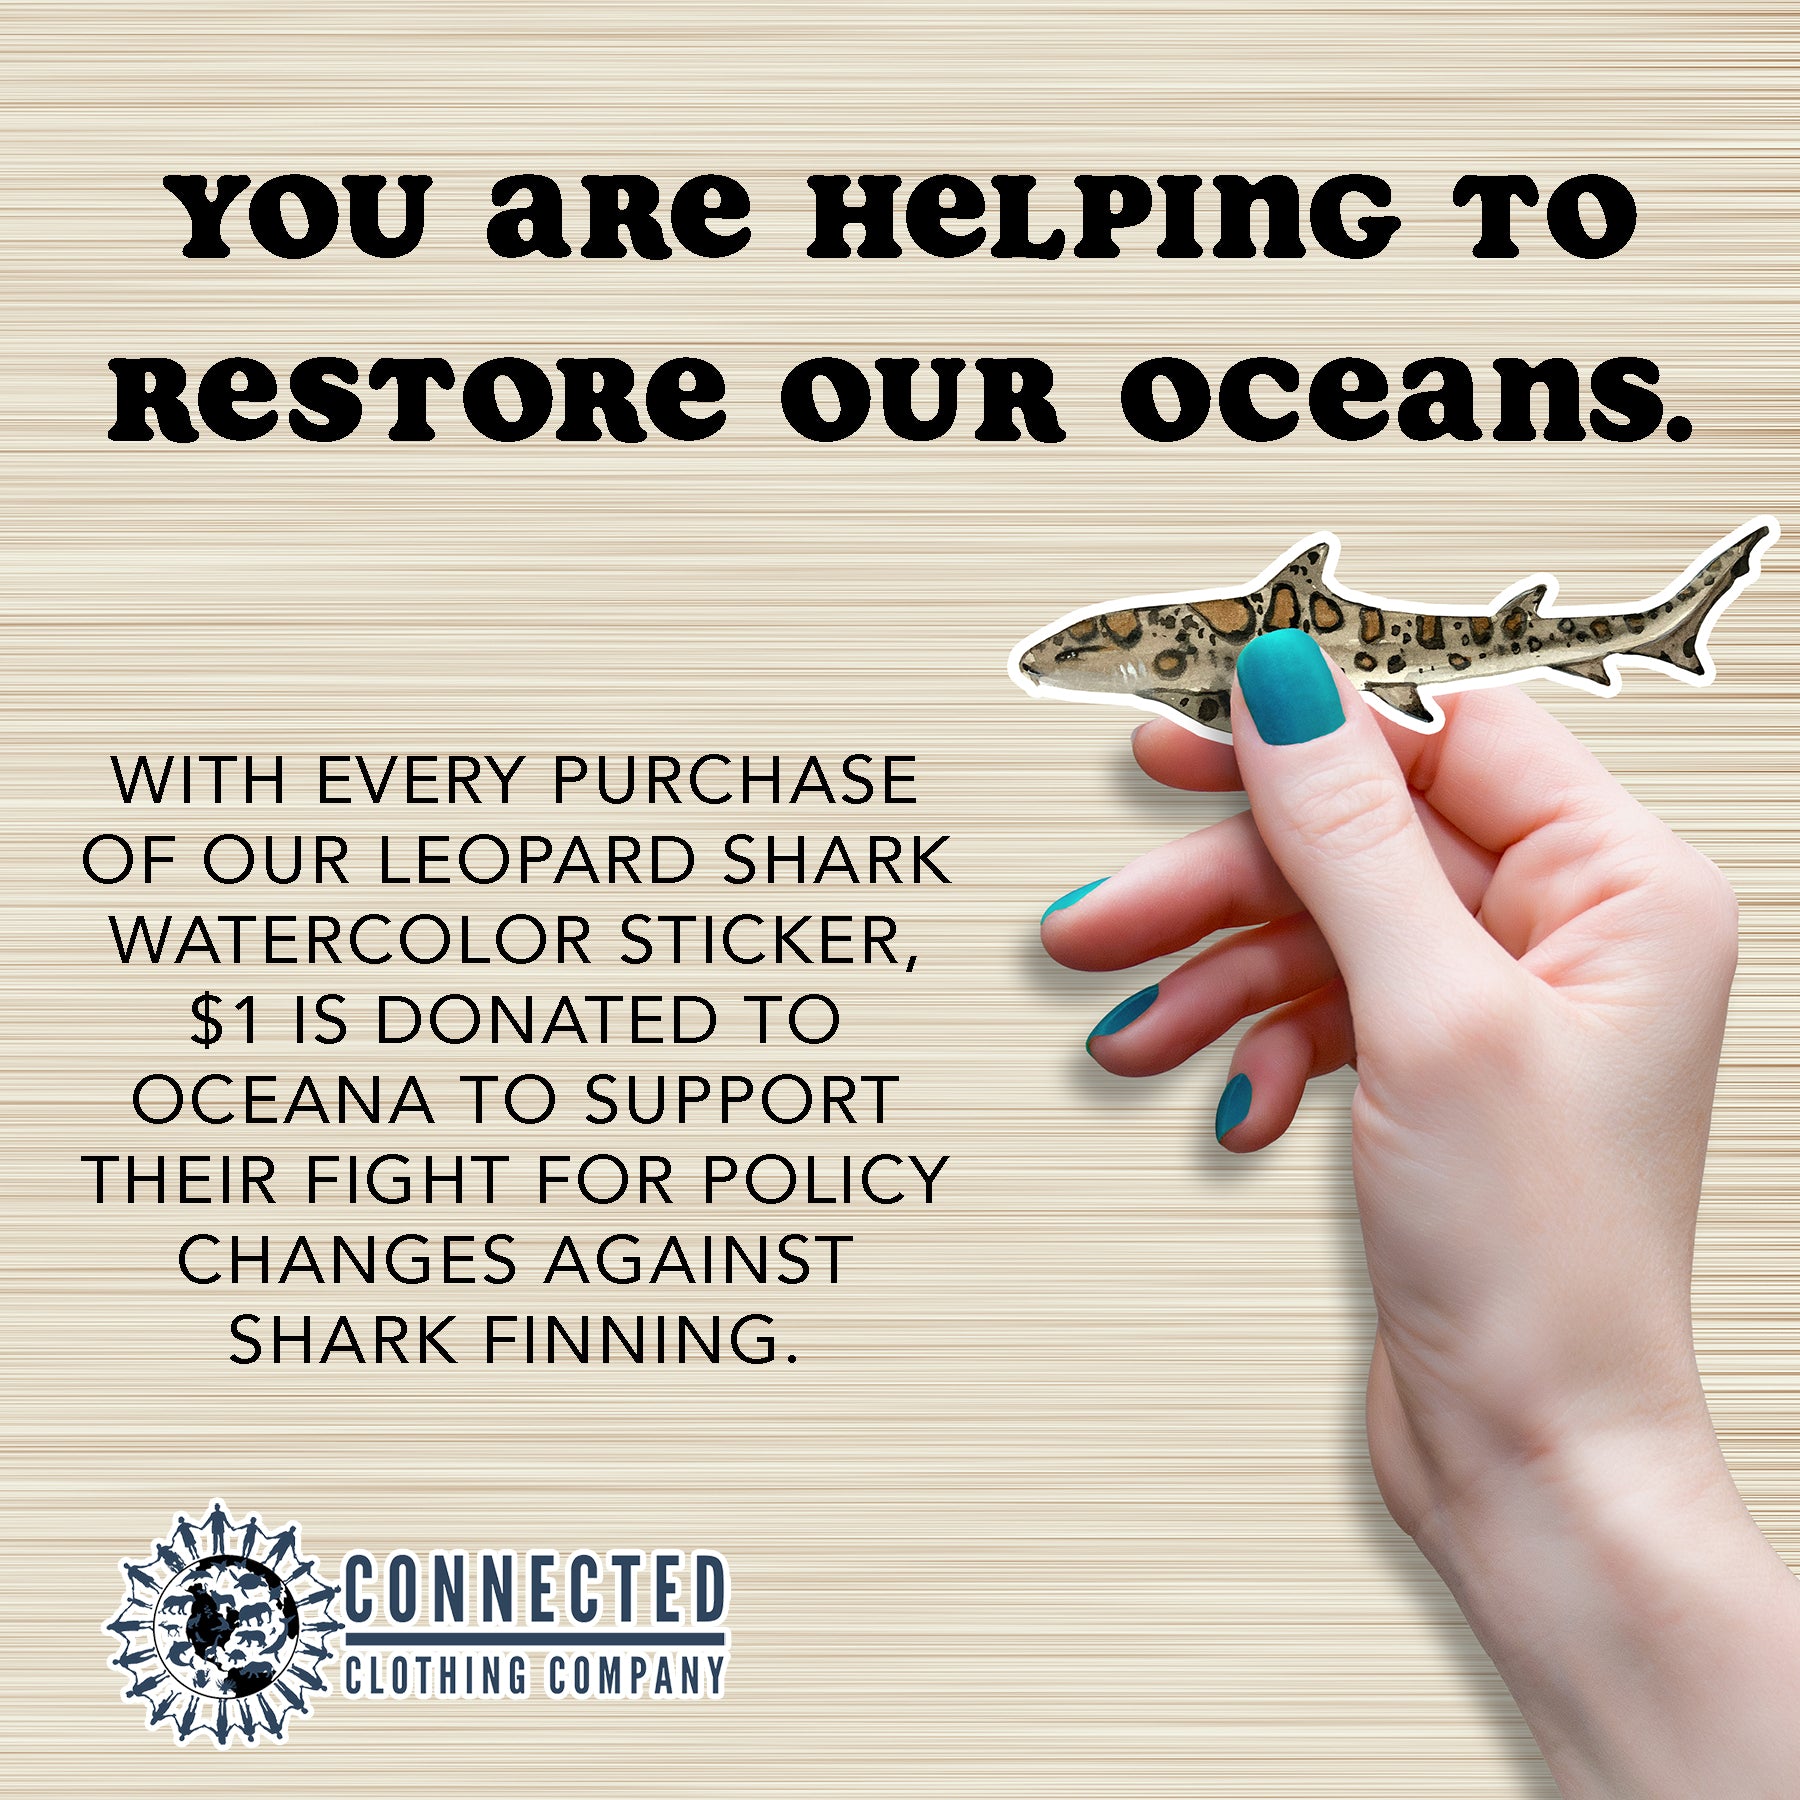 Hand Holding Leopard Shark Watercolor Sticker - "You are helping to restore our oceans. With every purchase of our leopard shark watercolor sticker, $1 is donated to oceana to support their fight for policy changes against shark finning." - Connected Clothing Company - Ethical and Sustainable Apparel - portion of profits donated to shark conservation